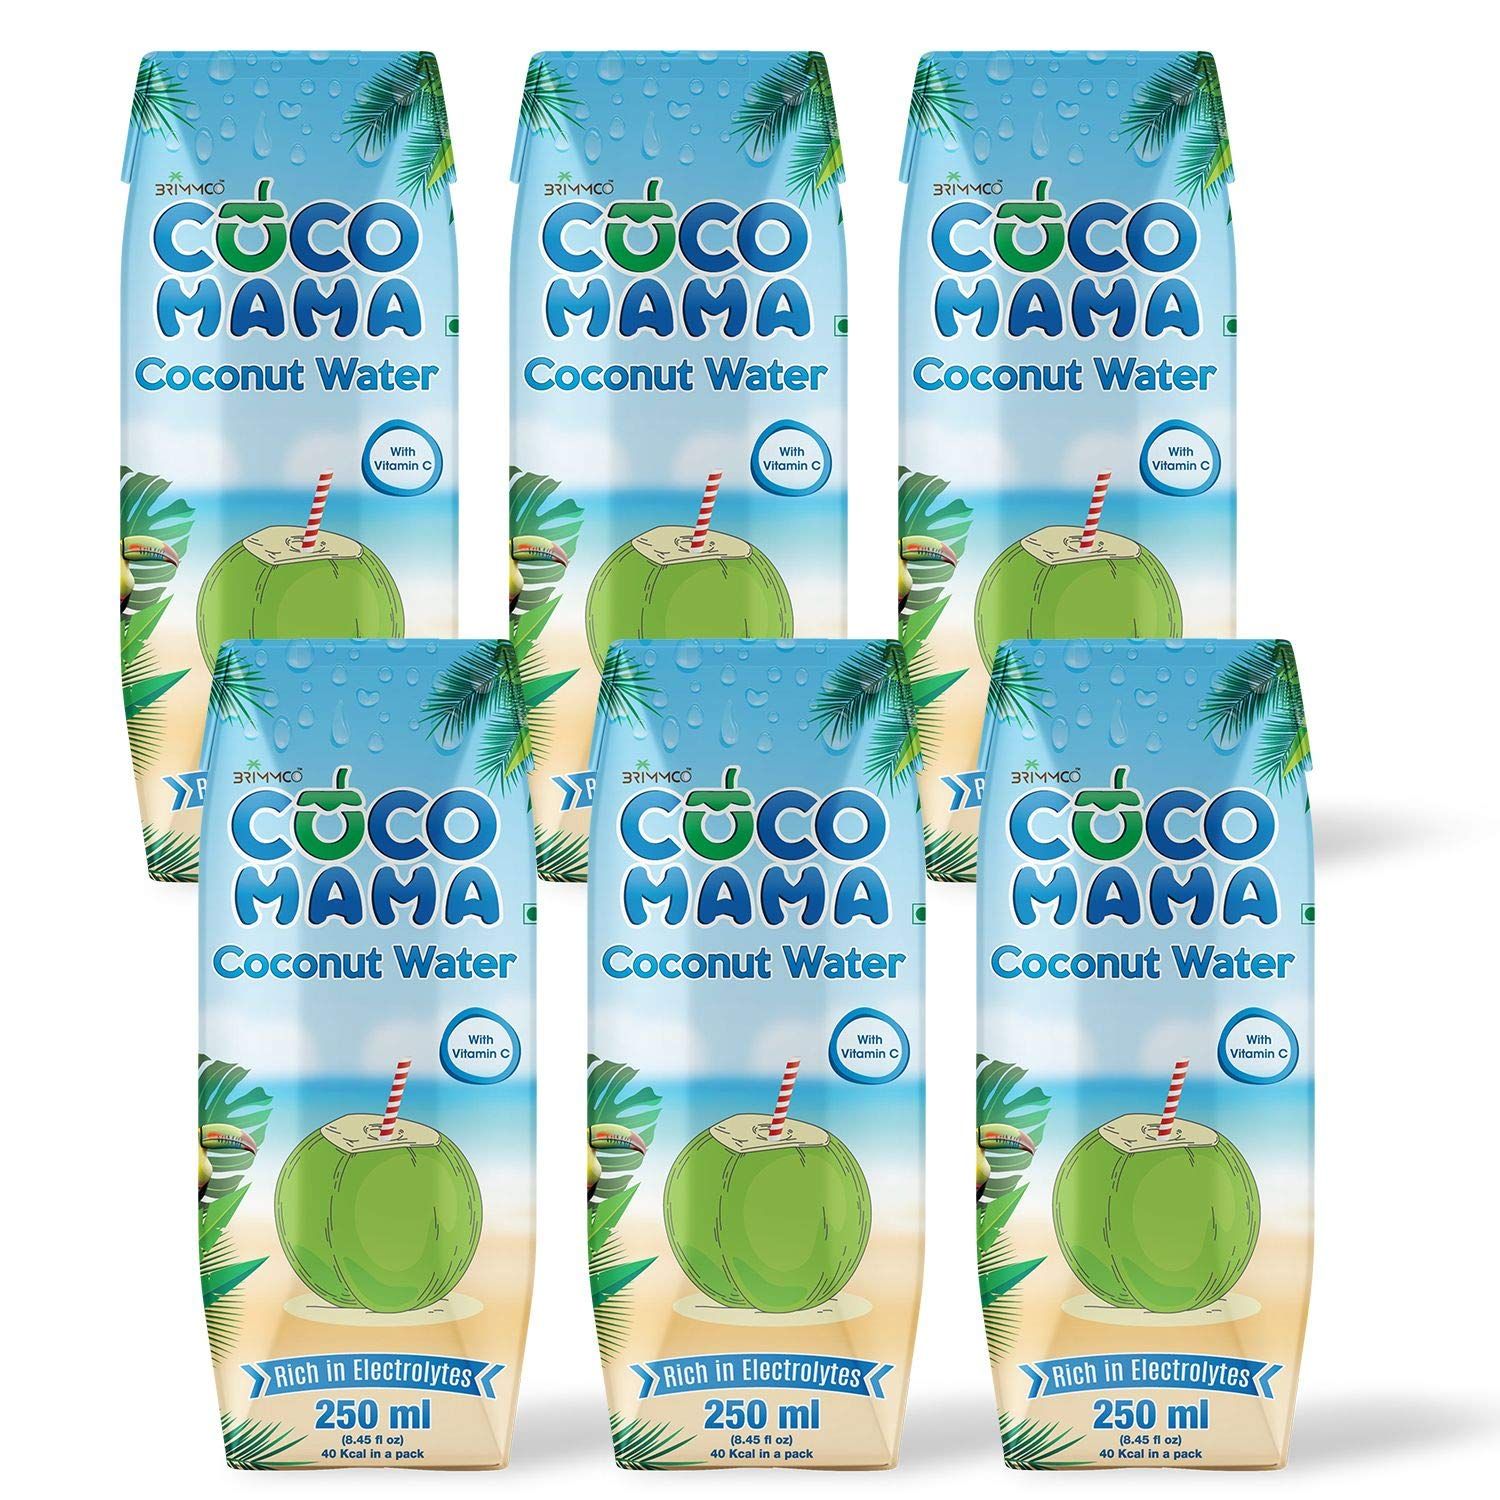 Coco Mamam Coconut Water Image